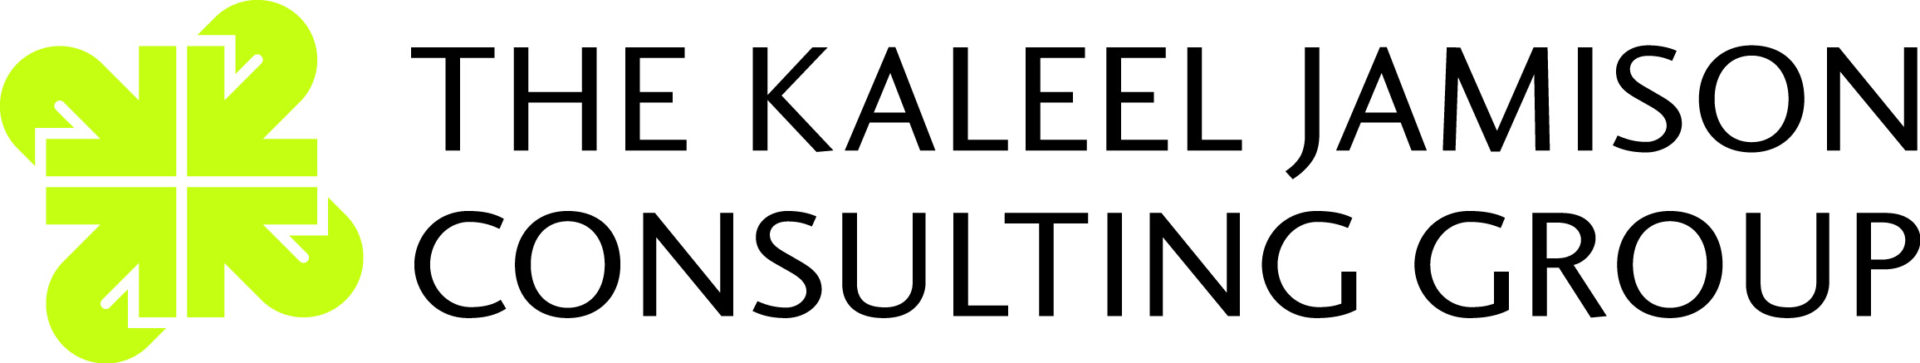 The Kaleel Jamison Consulting Group